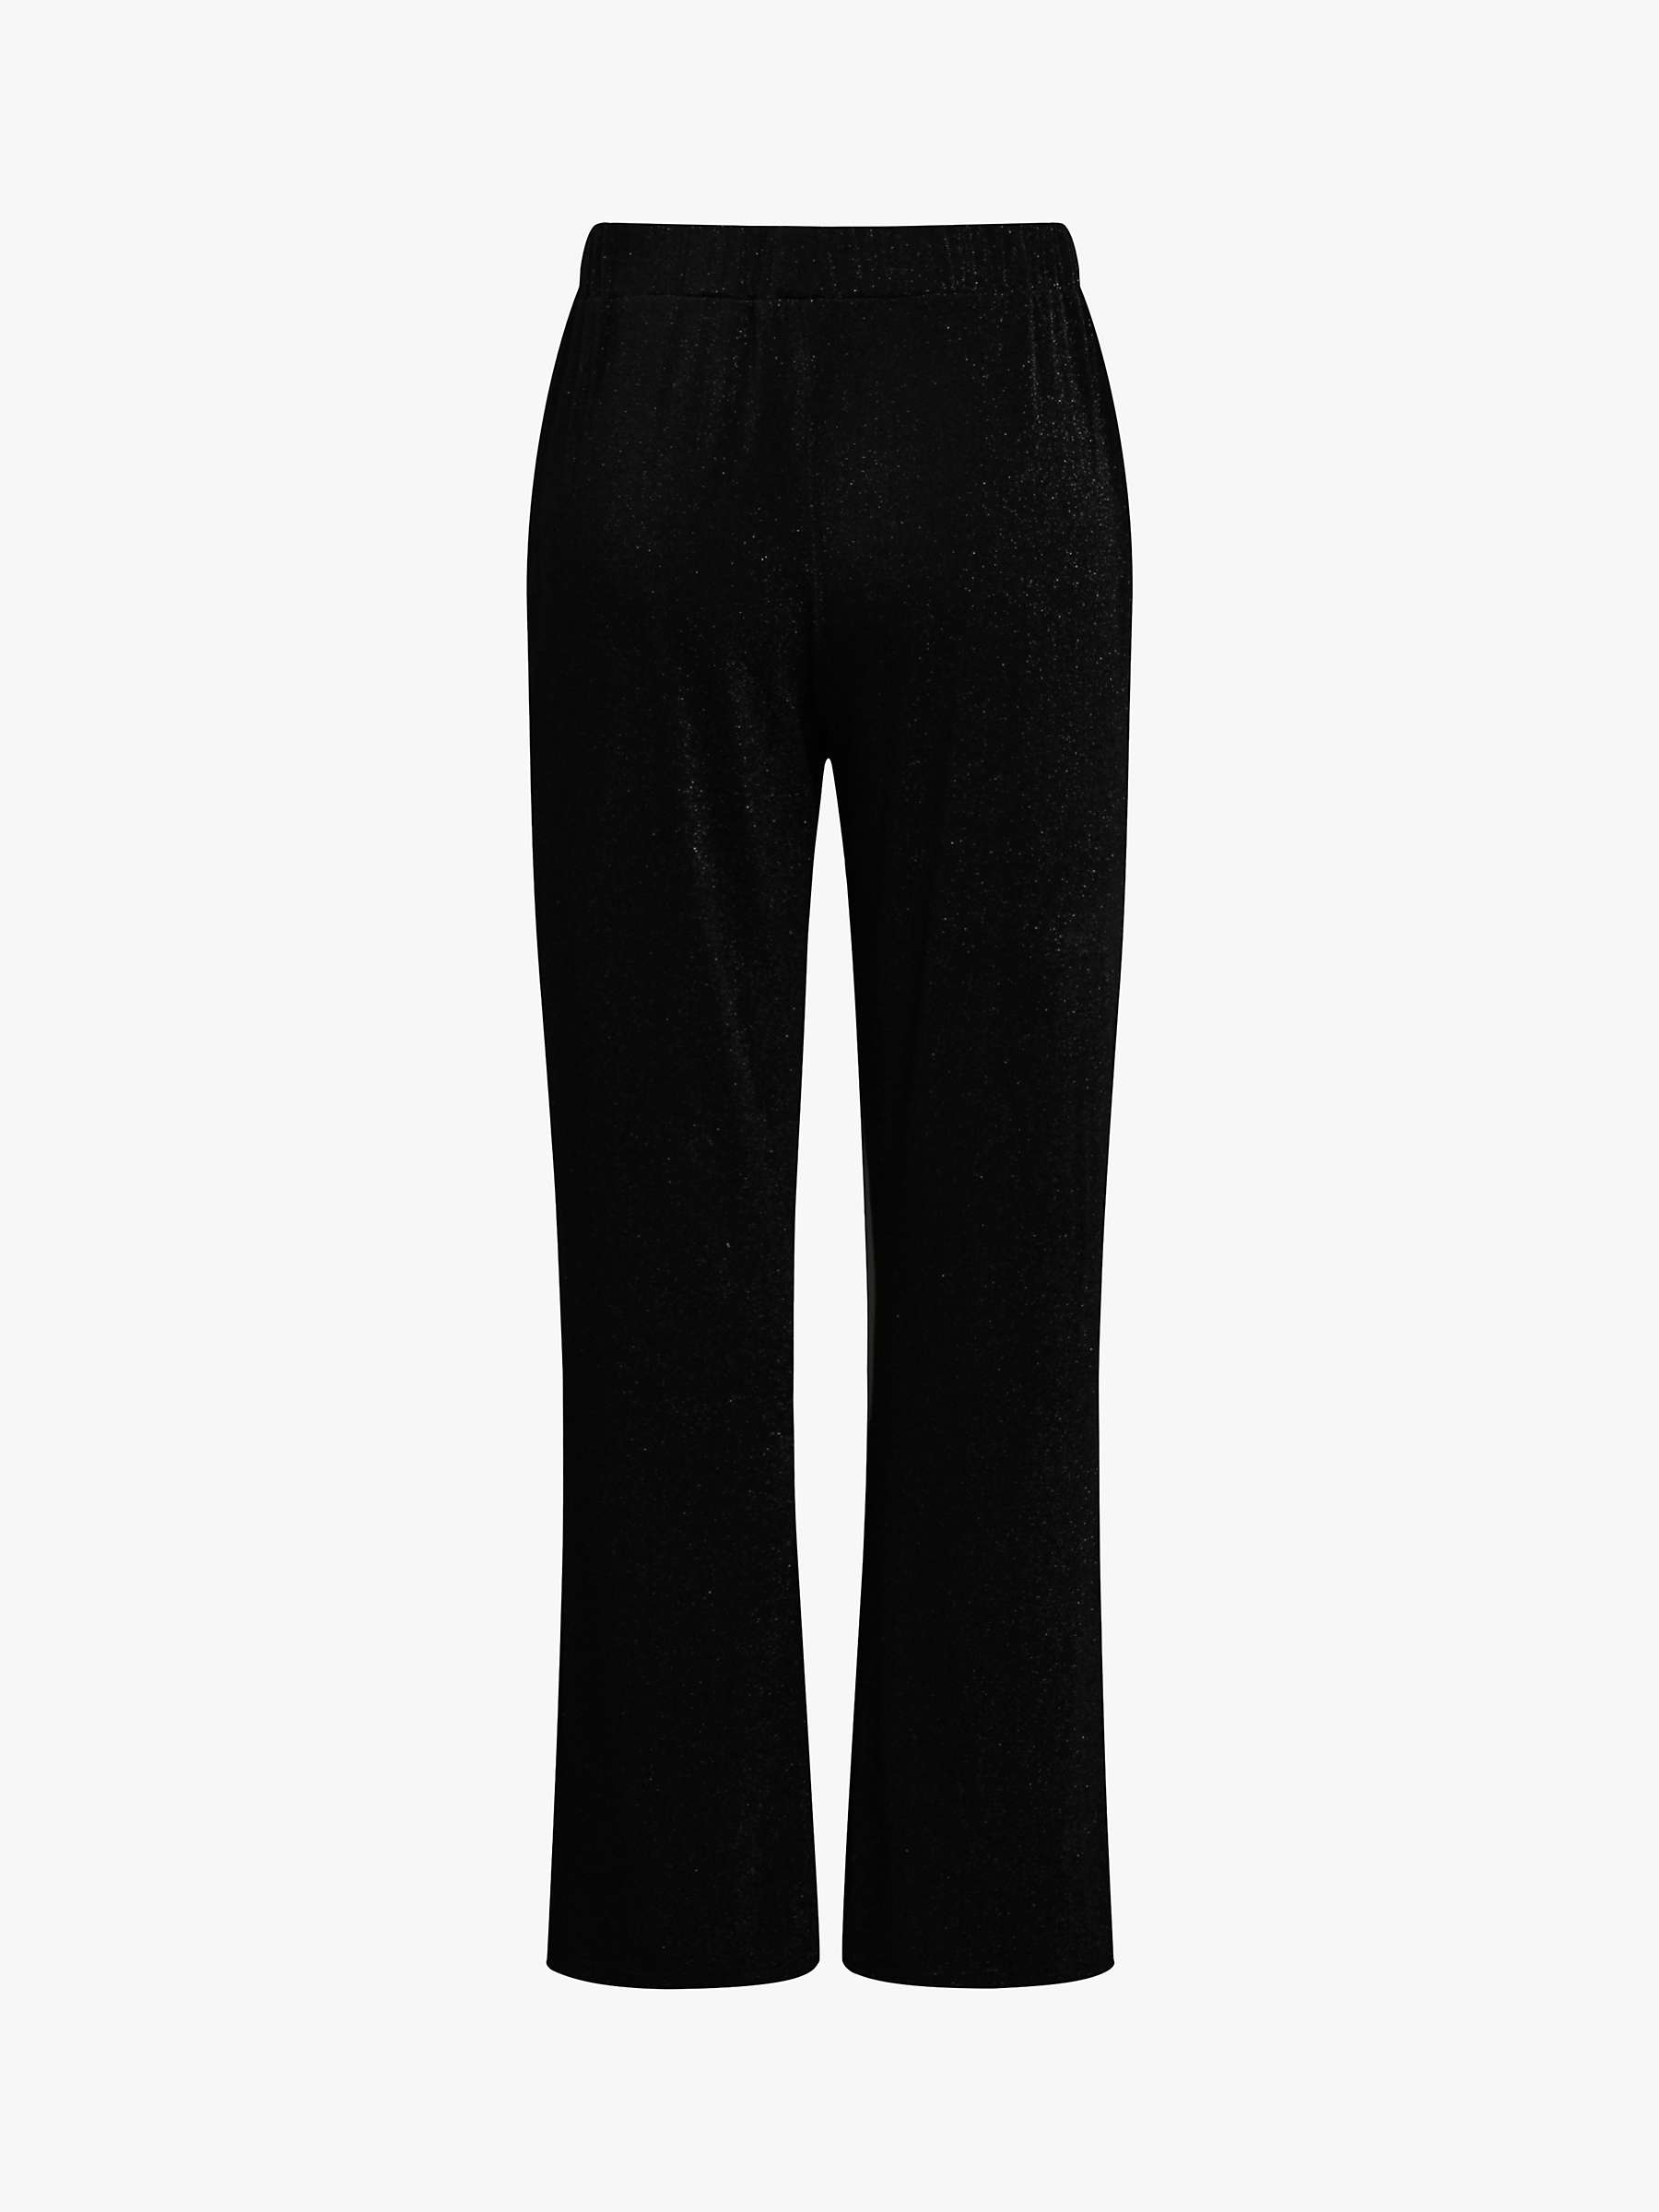 Buy A-VIEW Eva Loose Trousers, Black Online at johnlewis.com